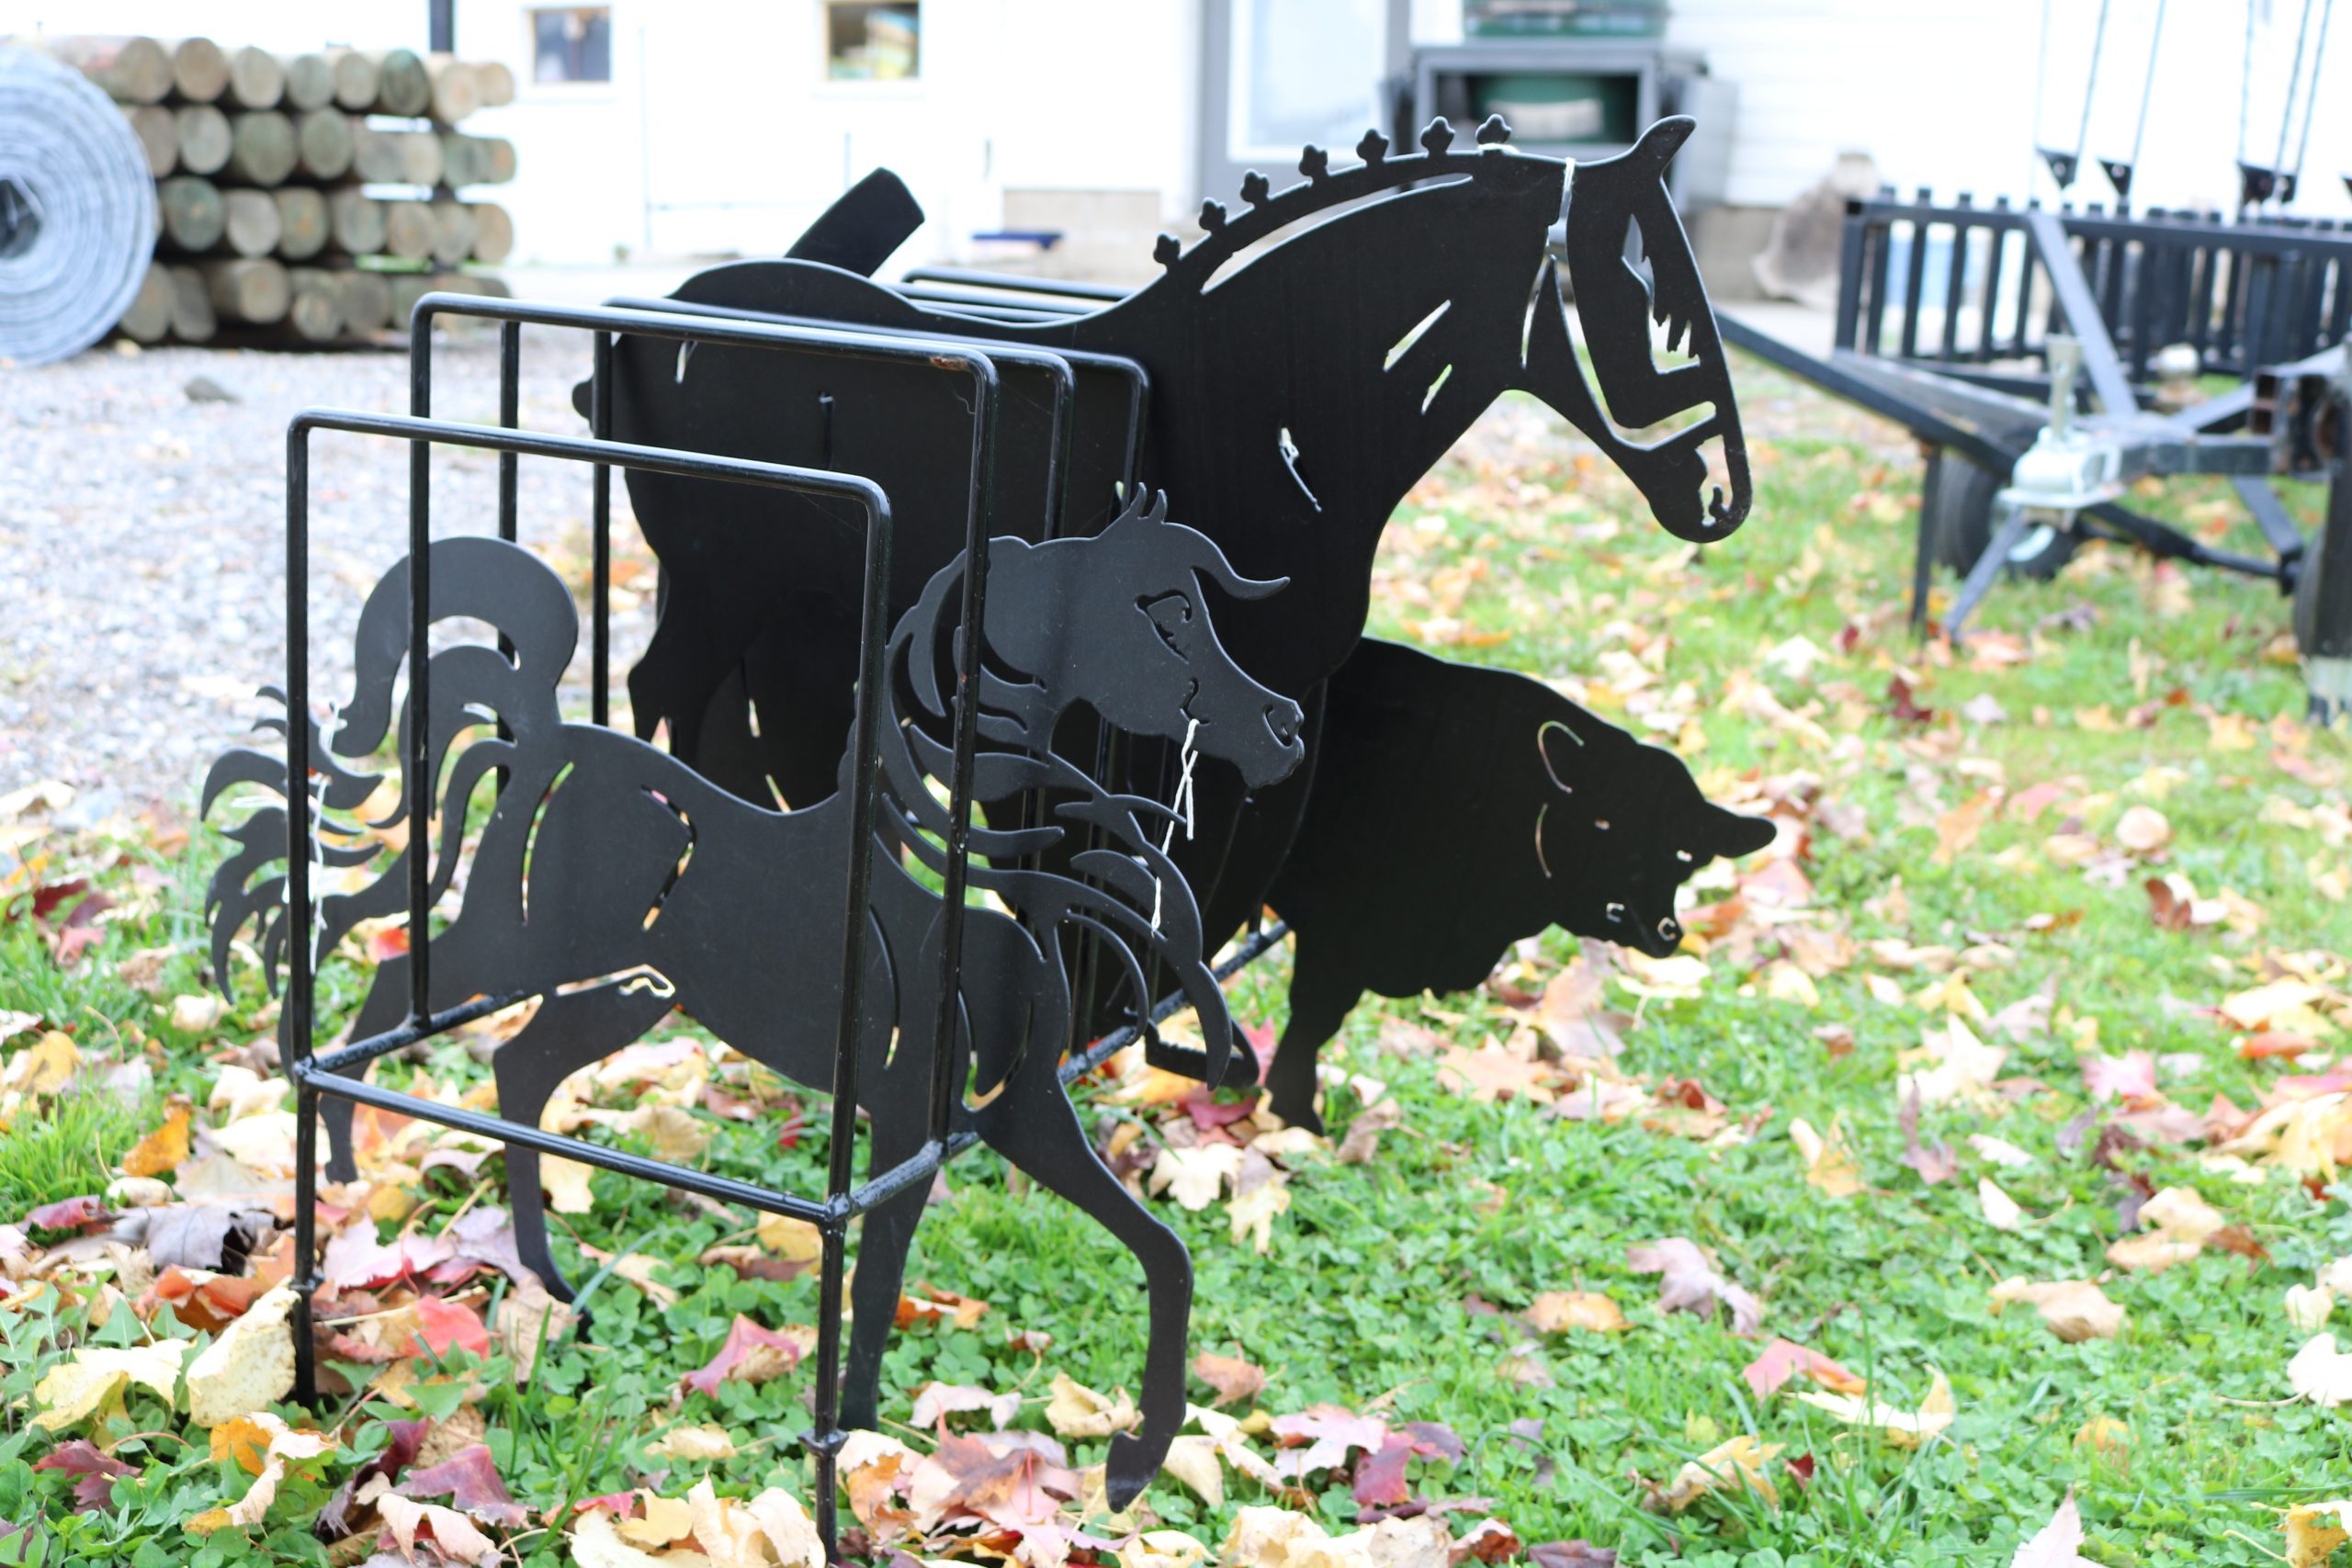 Handmade wrought iron items from Countryside Creations